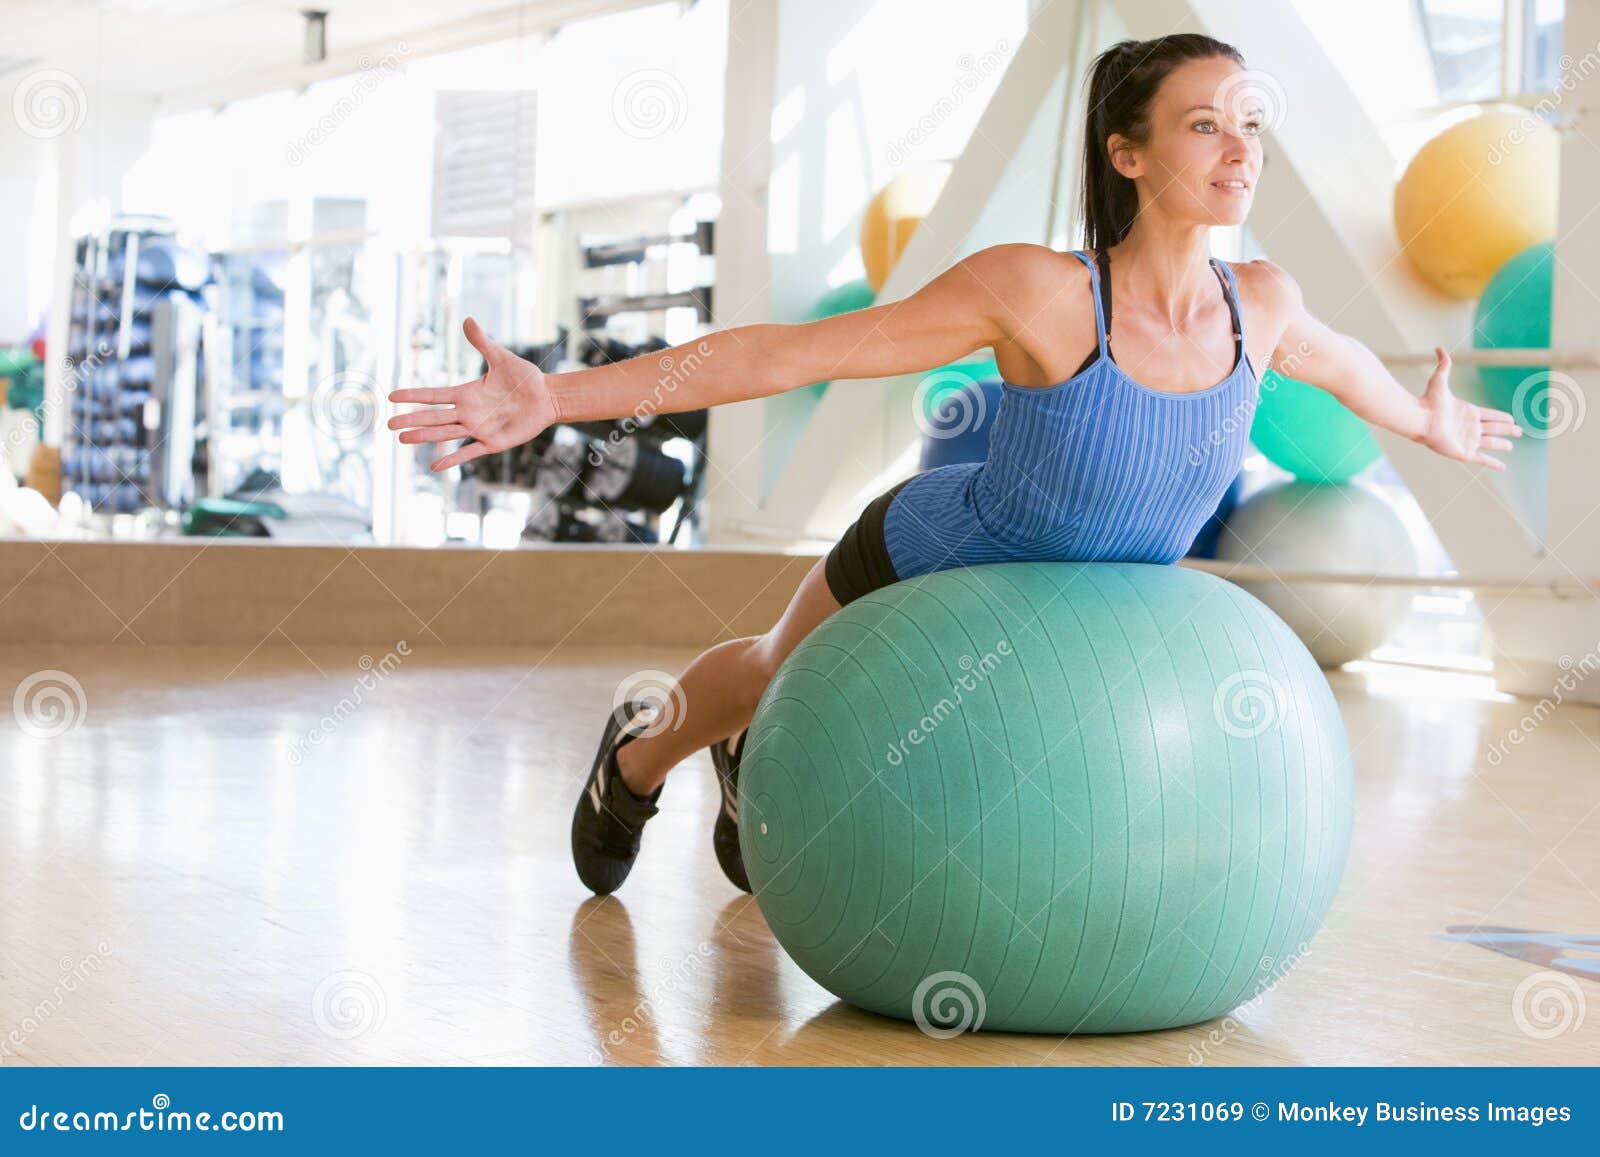 Slim Fit Black Woman Sitting on Yoga Swiss Ball Doing Abs Exercise